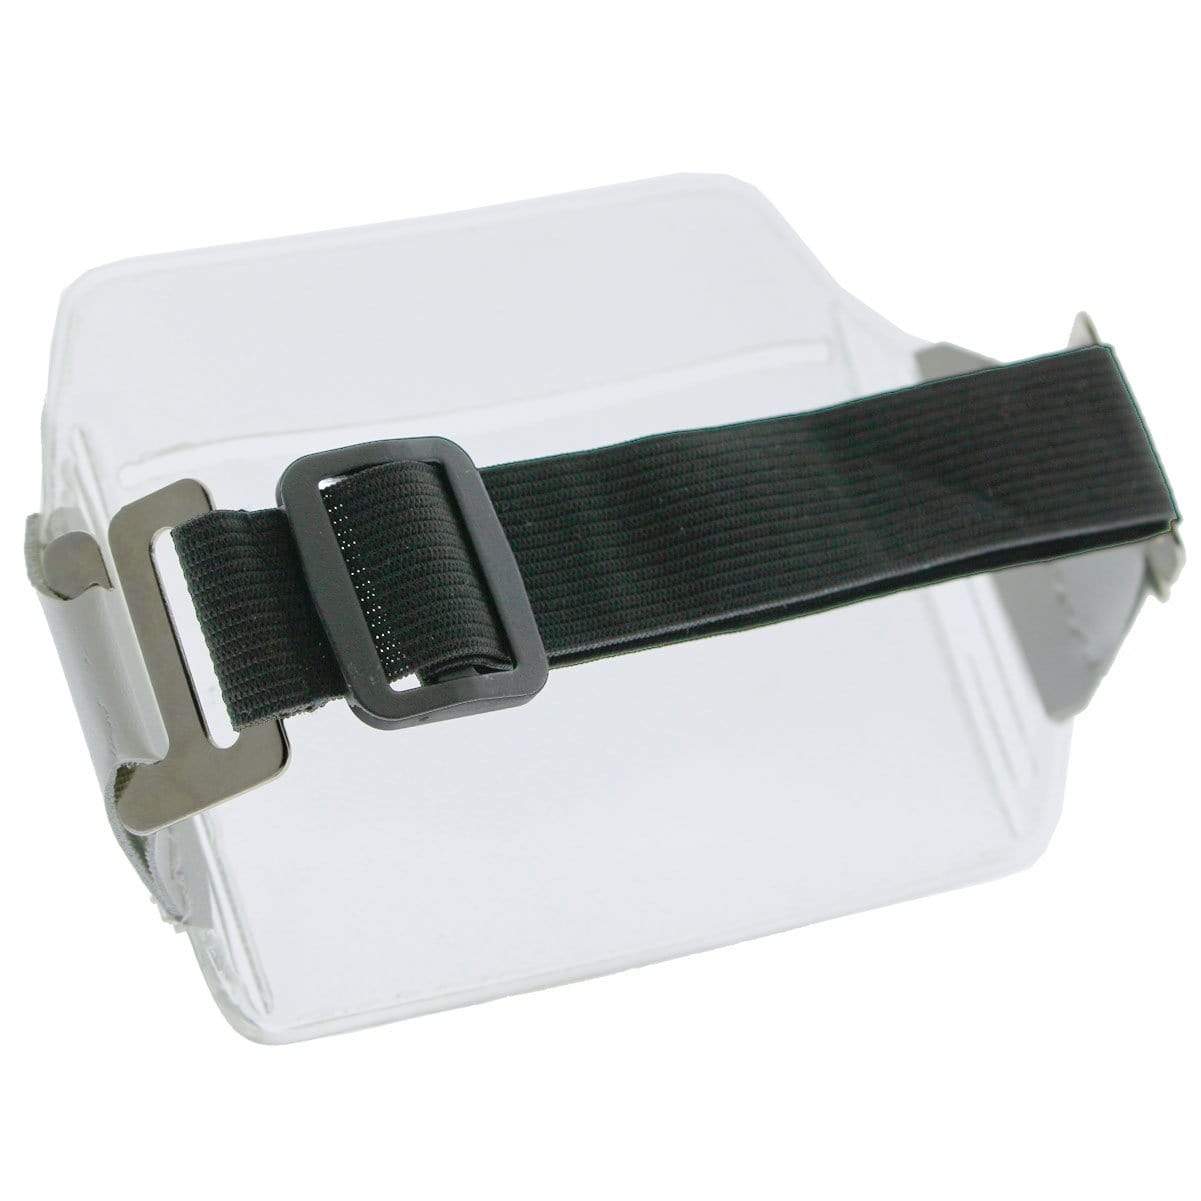 A Clear Over Size Vinyl Horizontal Arm Band Badge Holder (P/N 1840-7100) with a black adjustable head strap, metal attachments, and designed to integrate seamlessly with a clear vinyl badge holder.